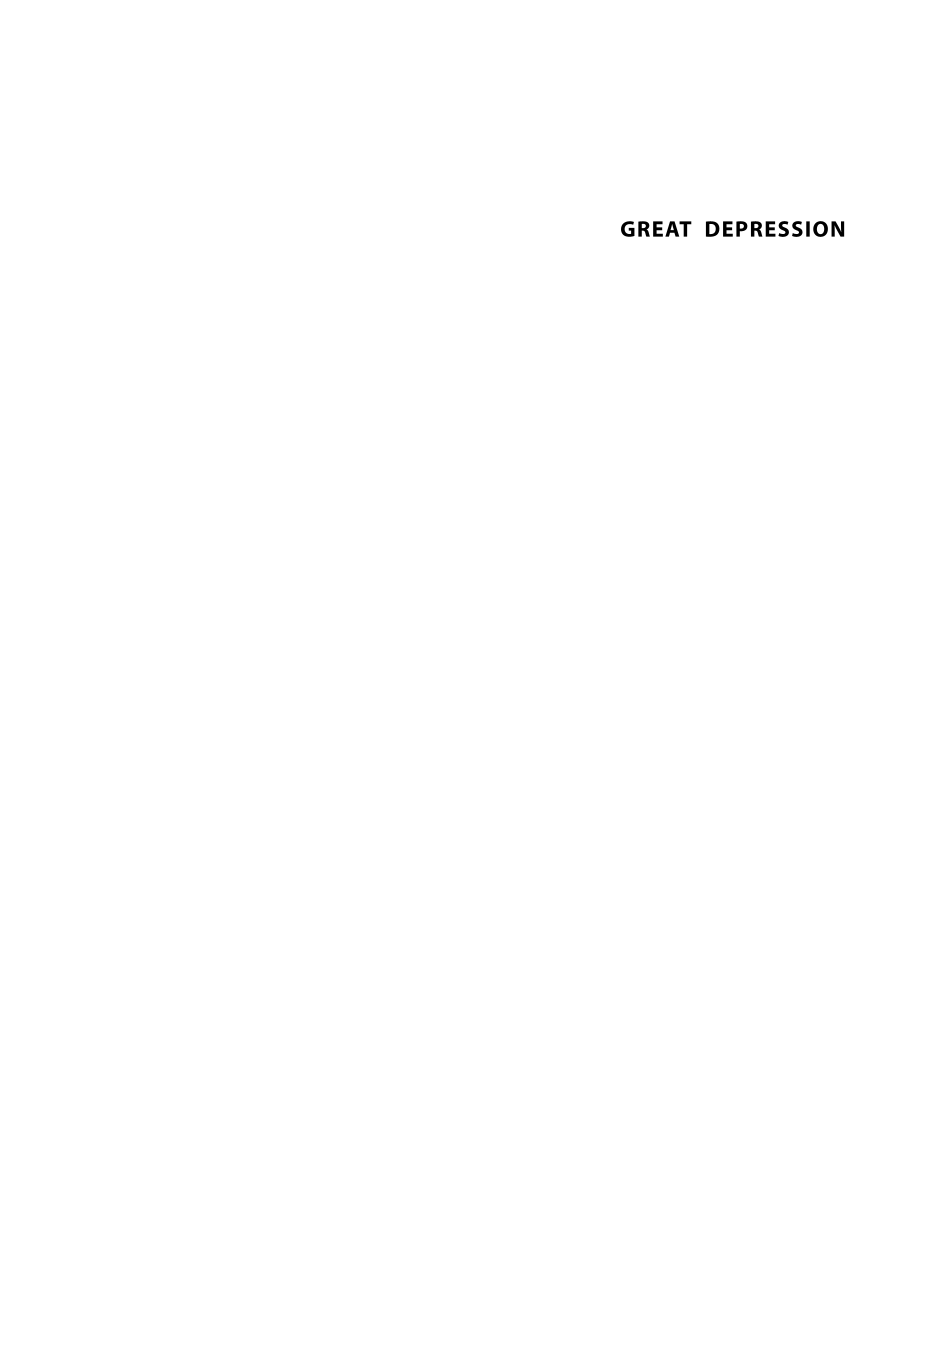 Great Depression: People and Perspectives page i